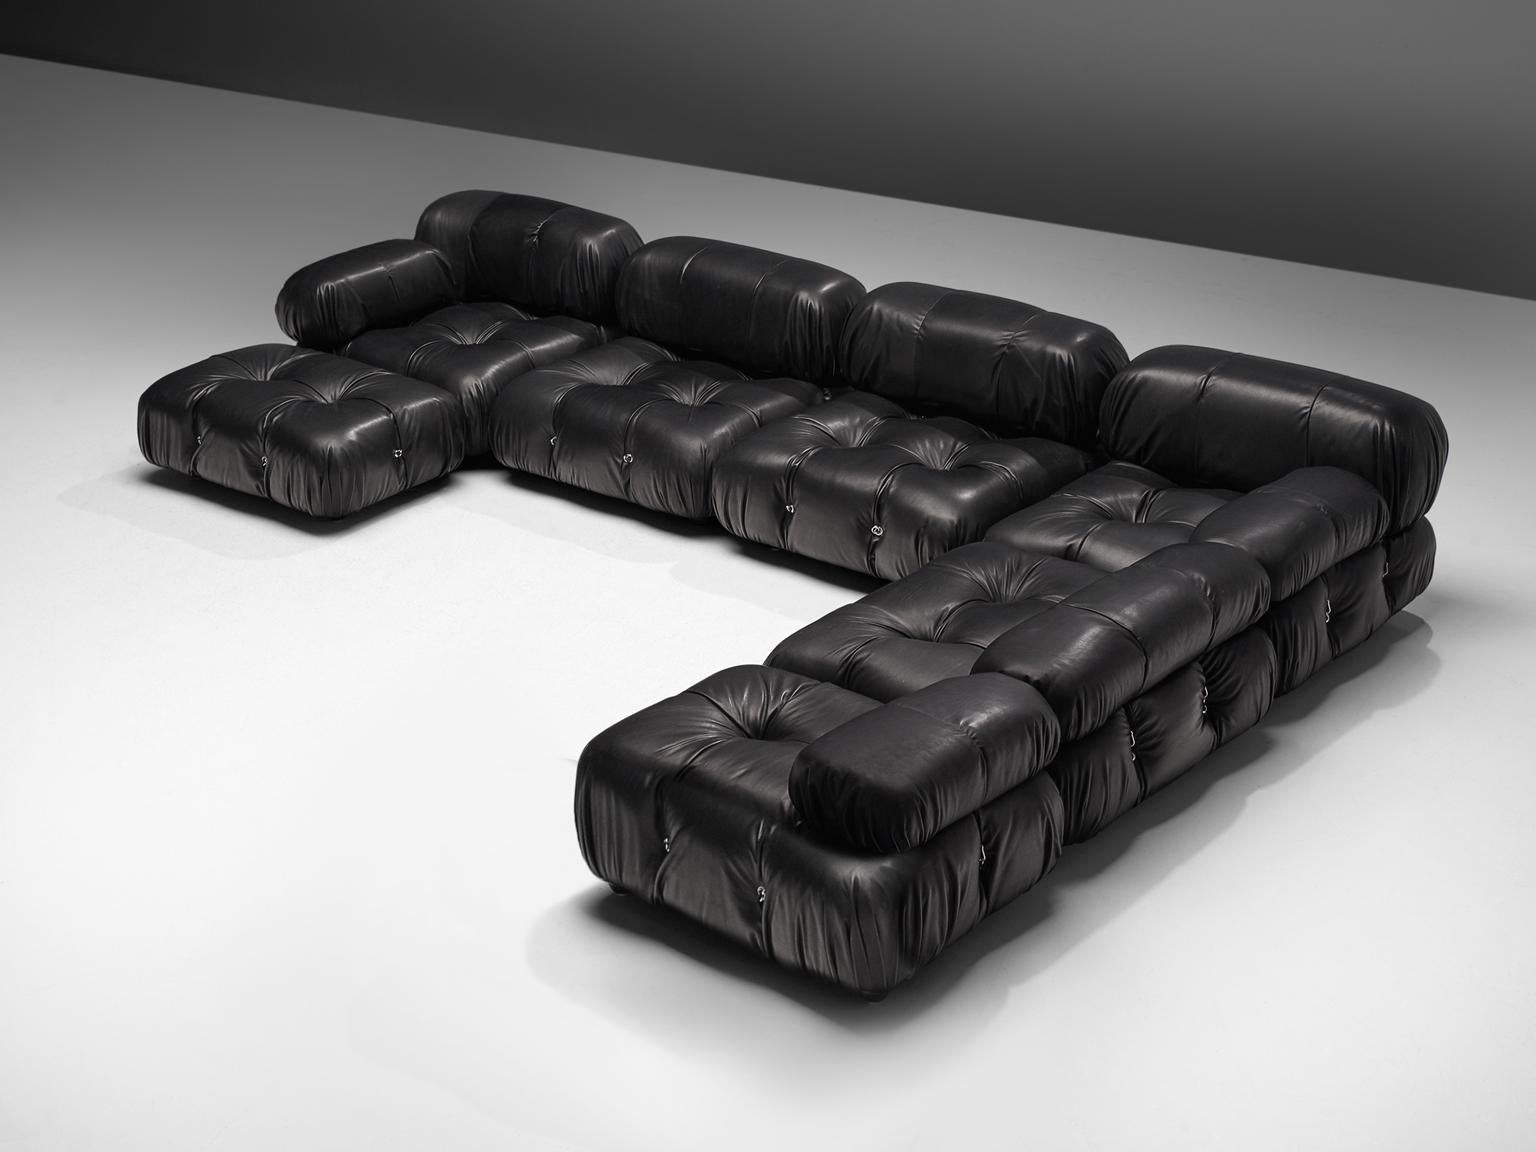 Mario Bellini, large modular 'Cameleonda' sofa, black leather upholstery, Italy, 1971, reupholstered by our in-house upholstery atelier. 

The sectional elements this sofa was made with can be used freely and apart from one another. The backs and